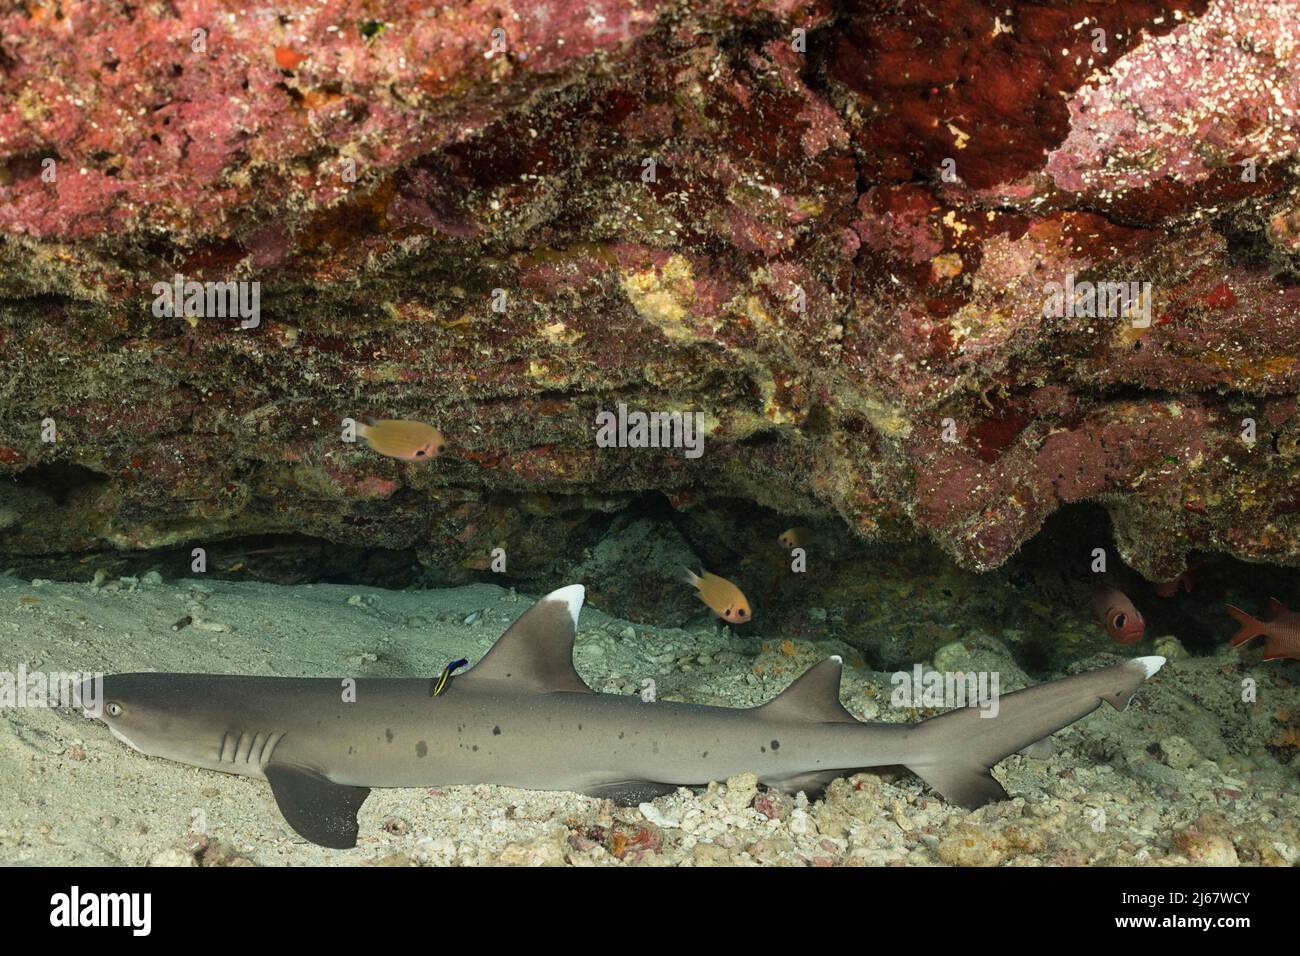 whitetip reef shark, Triaenodon obesus, resting under ledge while being cleaned by endemic Hawaiian cleaner wrasse, Labroides phthirophagus, Hawaii US Stock Photo